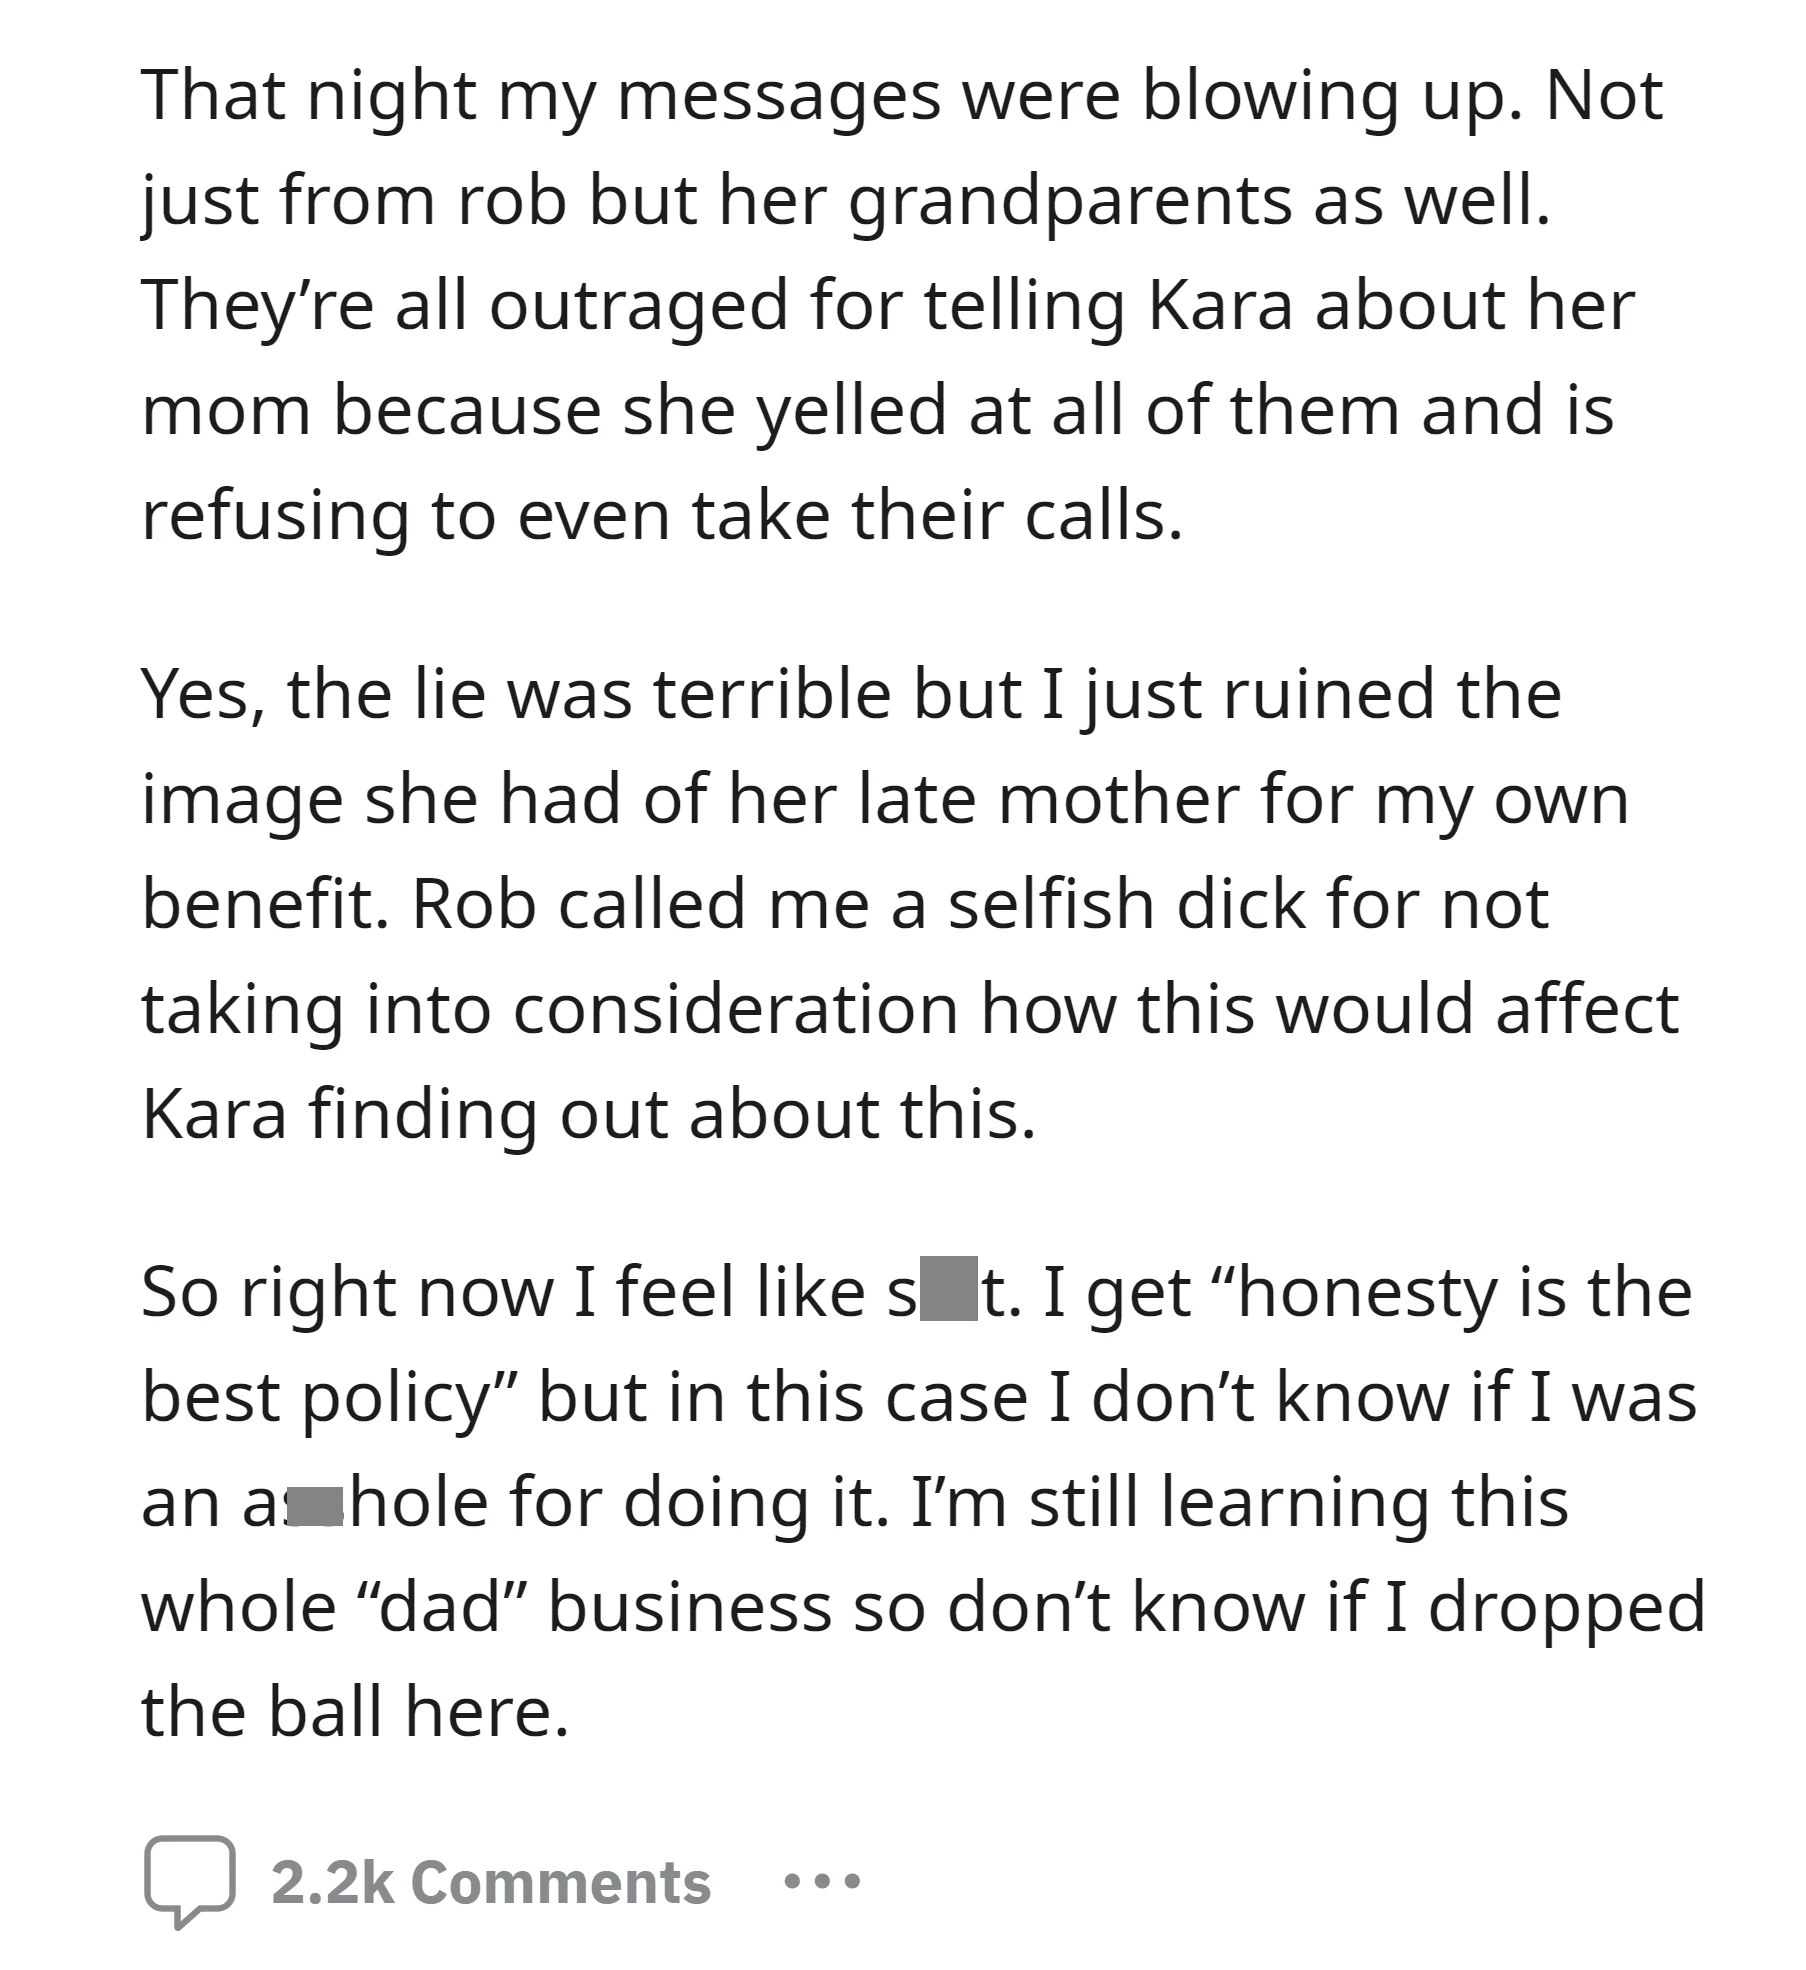 OP faced backlash from his daughter's family after revealing the truth about her mother to her